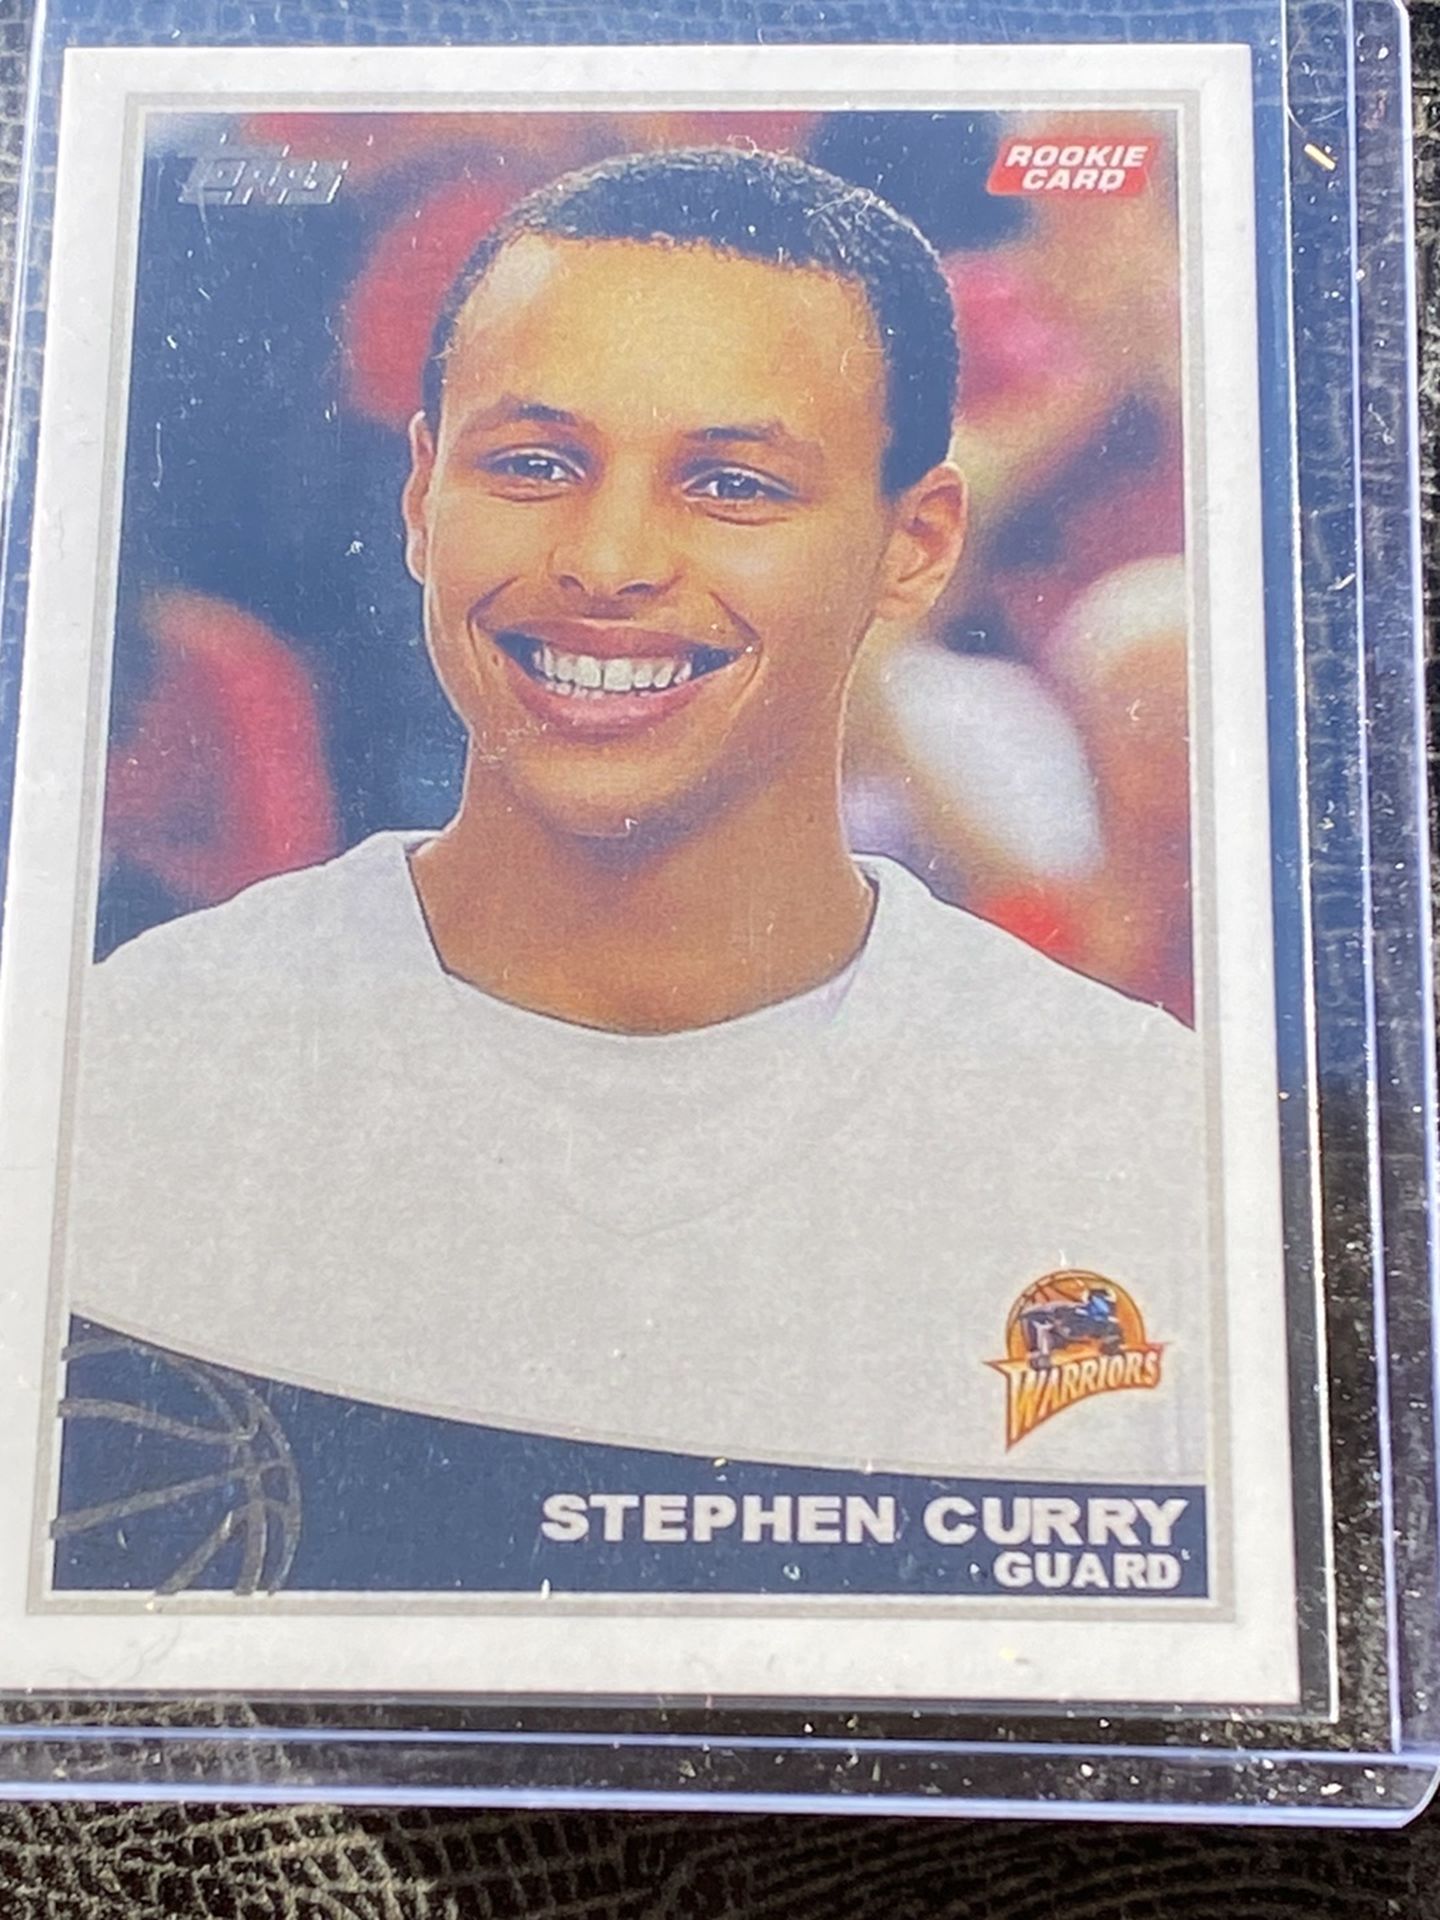 Stephen Curry Topps 2008 Rookie Card